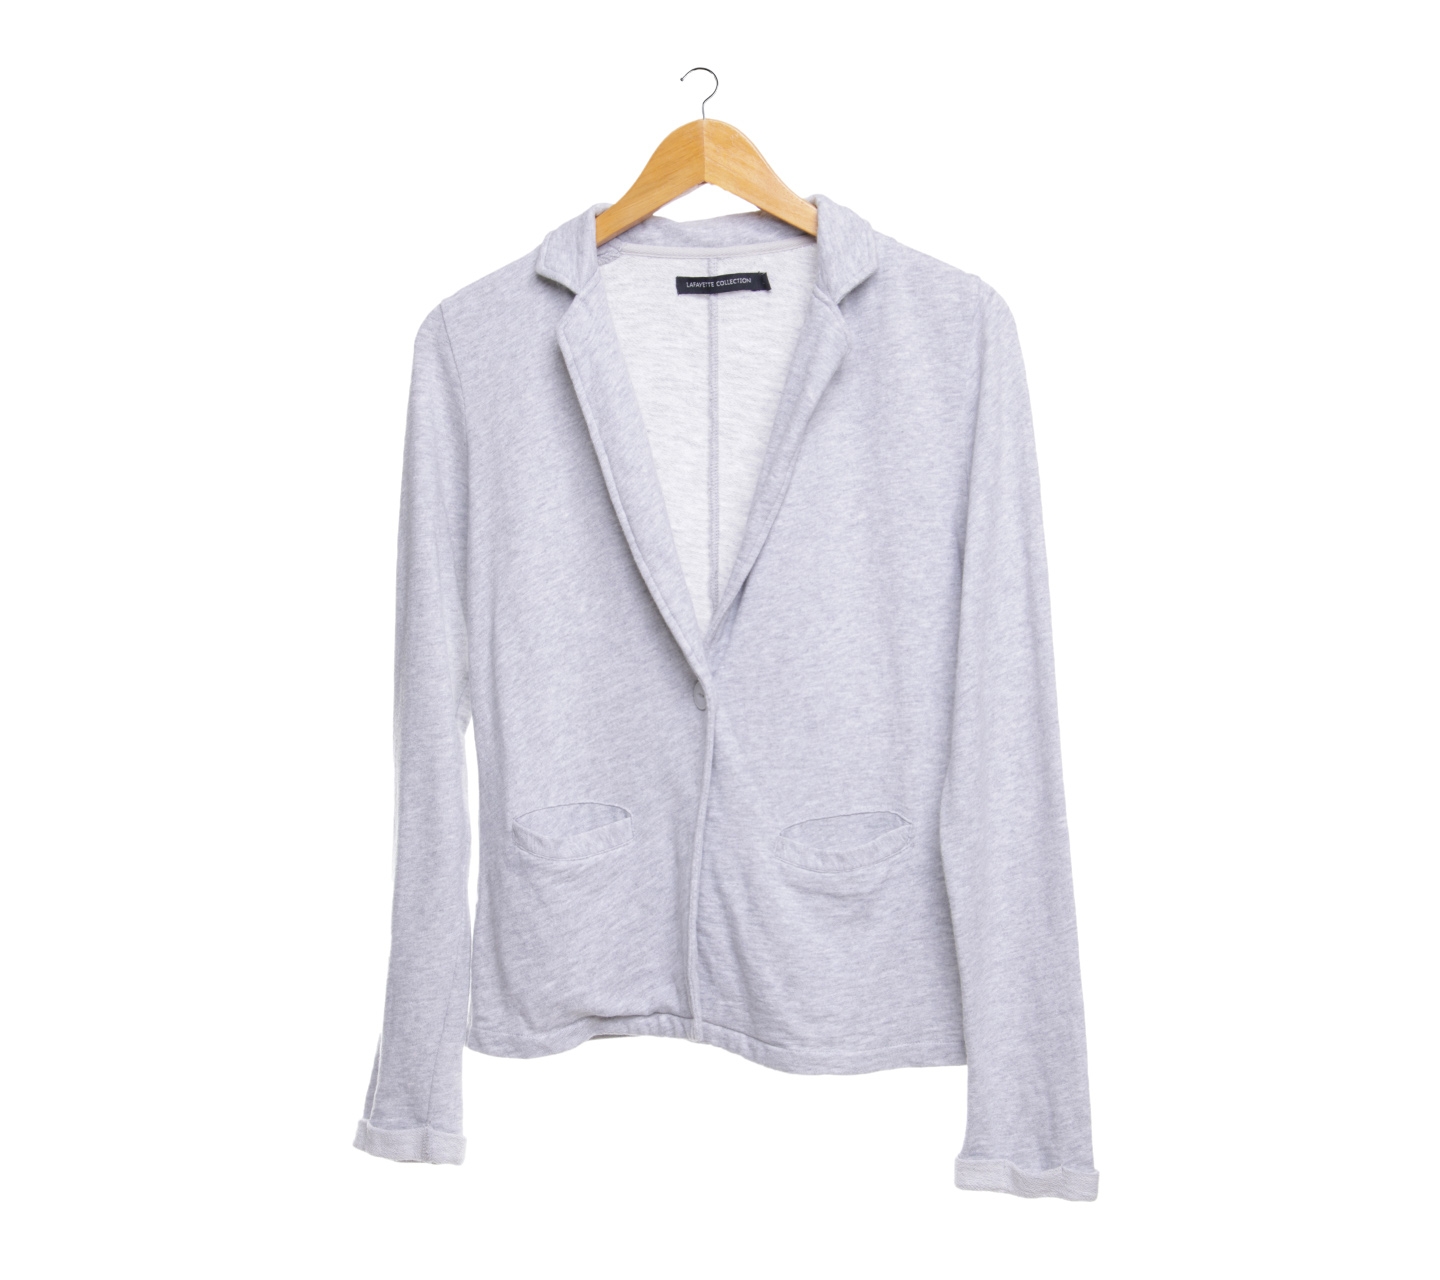 Laffayette Collection Grey Outerwear